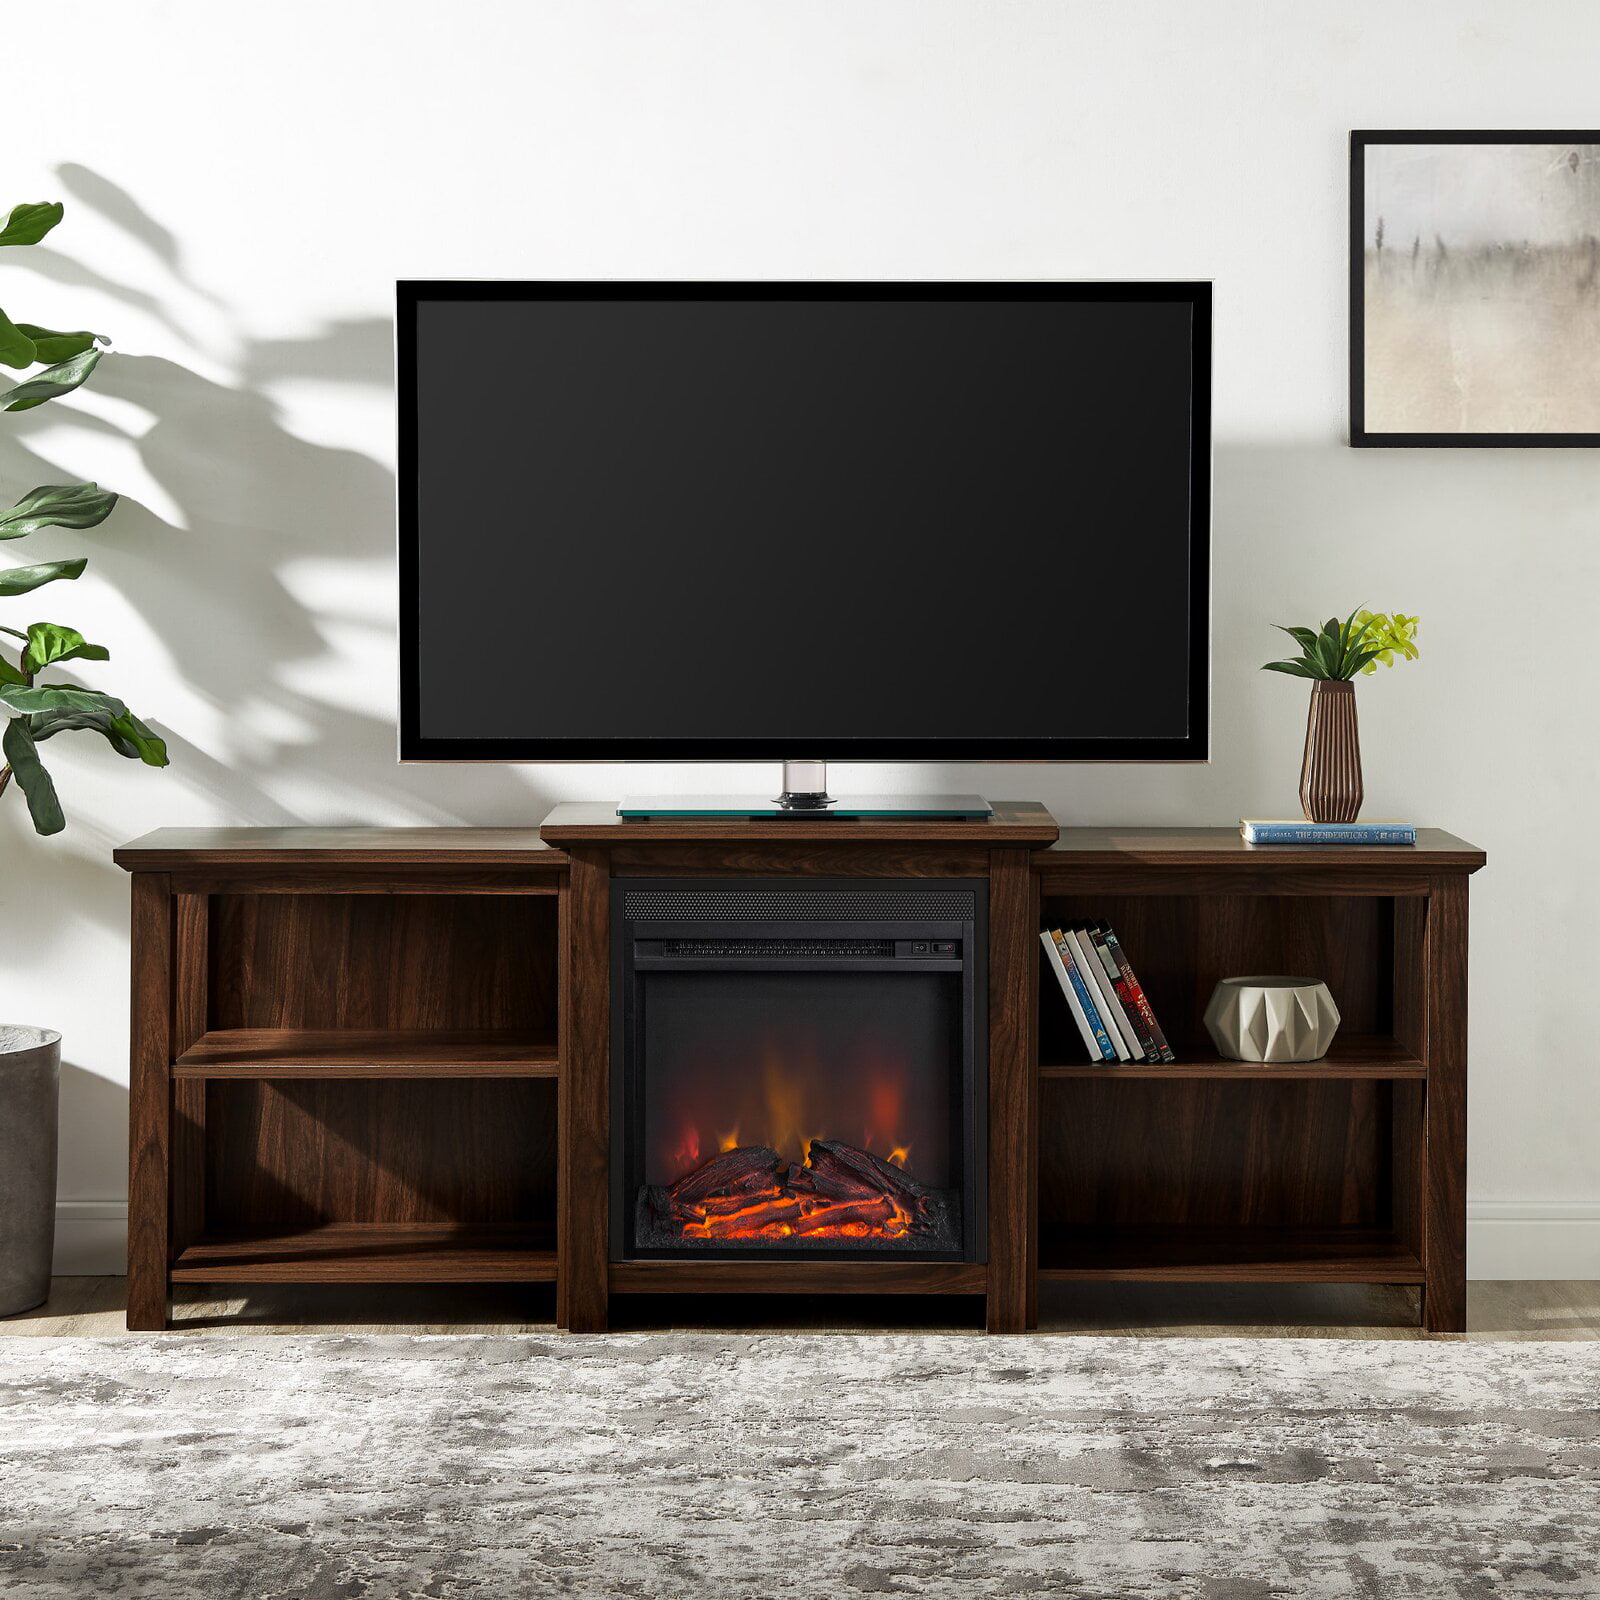 Woodbury Tv Stand For Tvs Up To 78 With Fireplace Included Overall